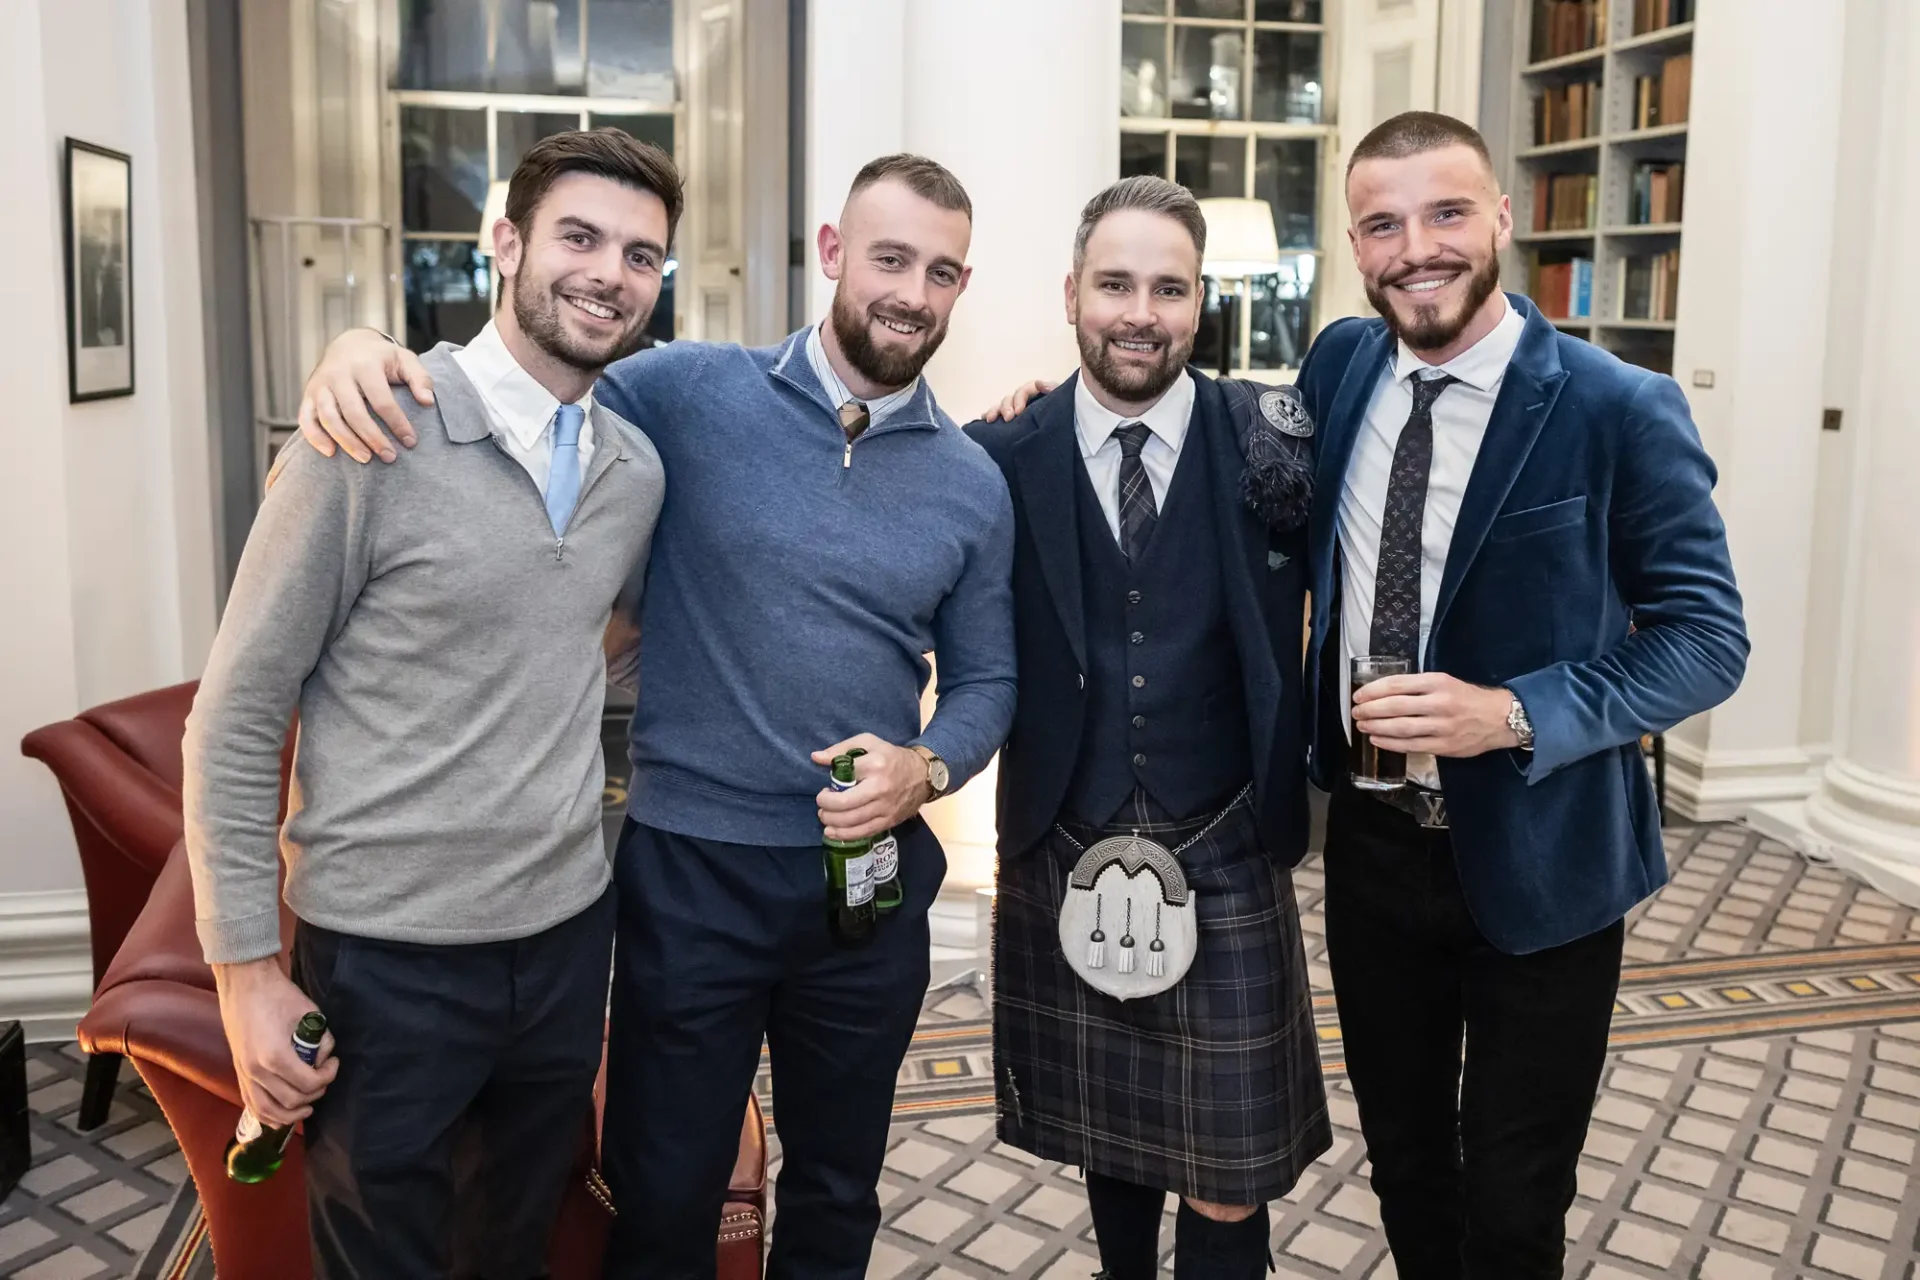 Four men smiling at a formal event, one wearing a kilt, holding drinks in a library setting with elegant decor.